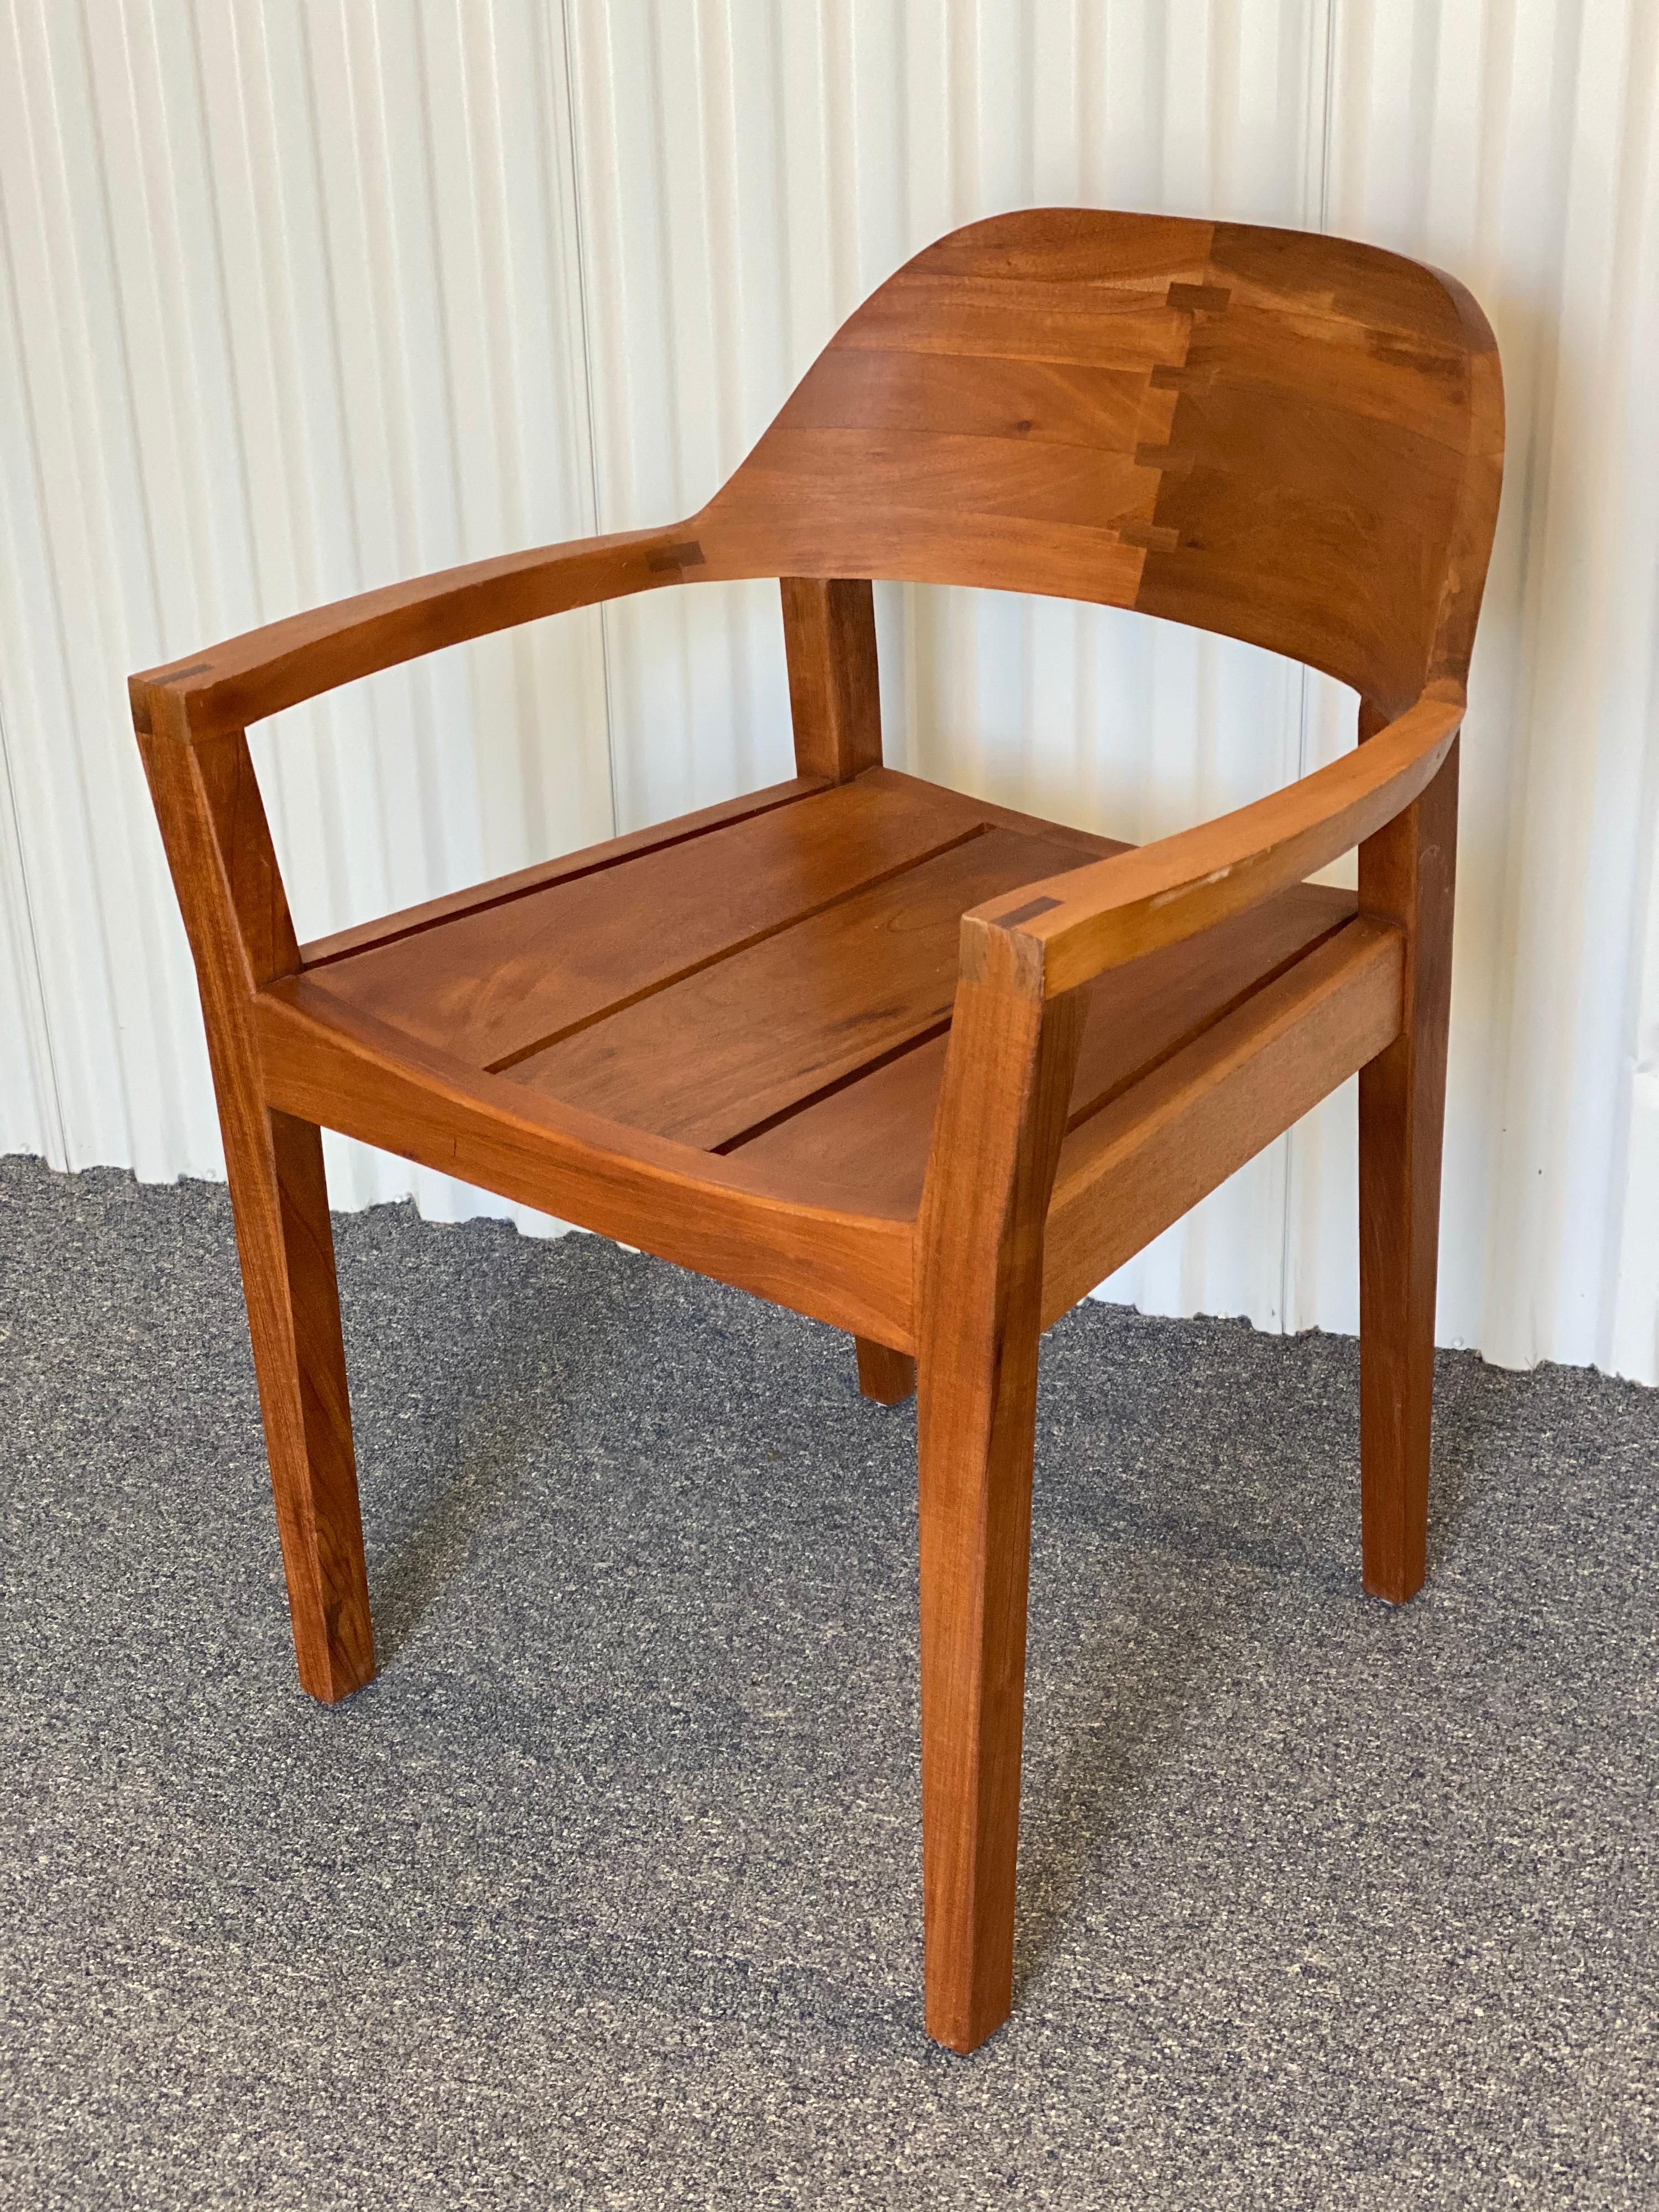 Handmade modern style Royal mahogany srmchair.
Made in Nicaragua out of local wood, Cedro Macho or Royal mahogany wood. Some scratches to finish. Really well made, solid chair with interesting design details.

Measures: 33